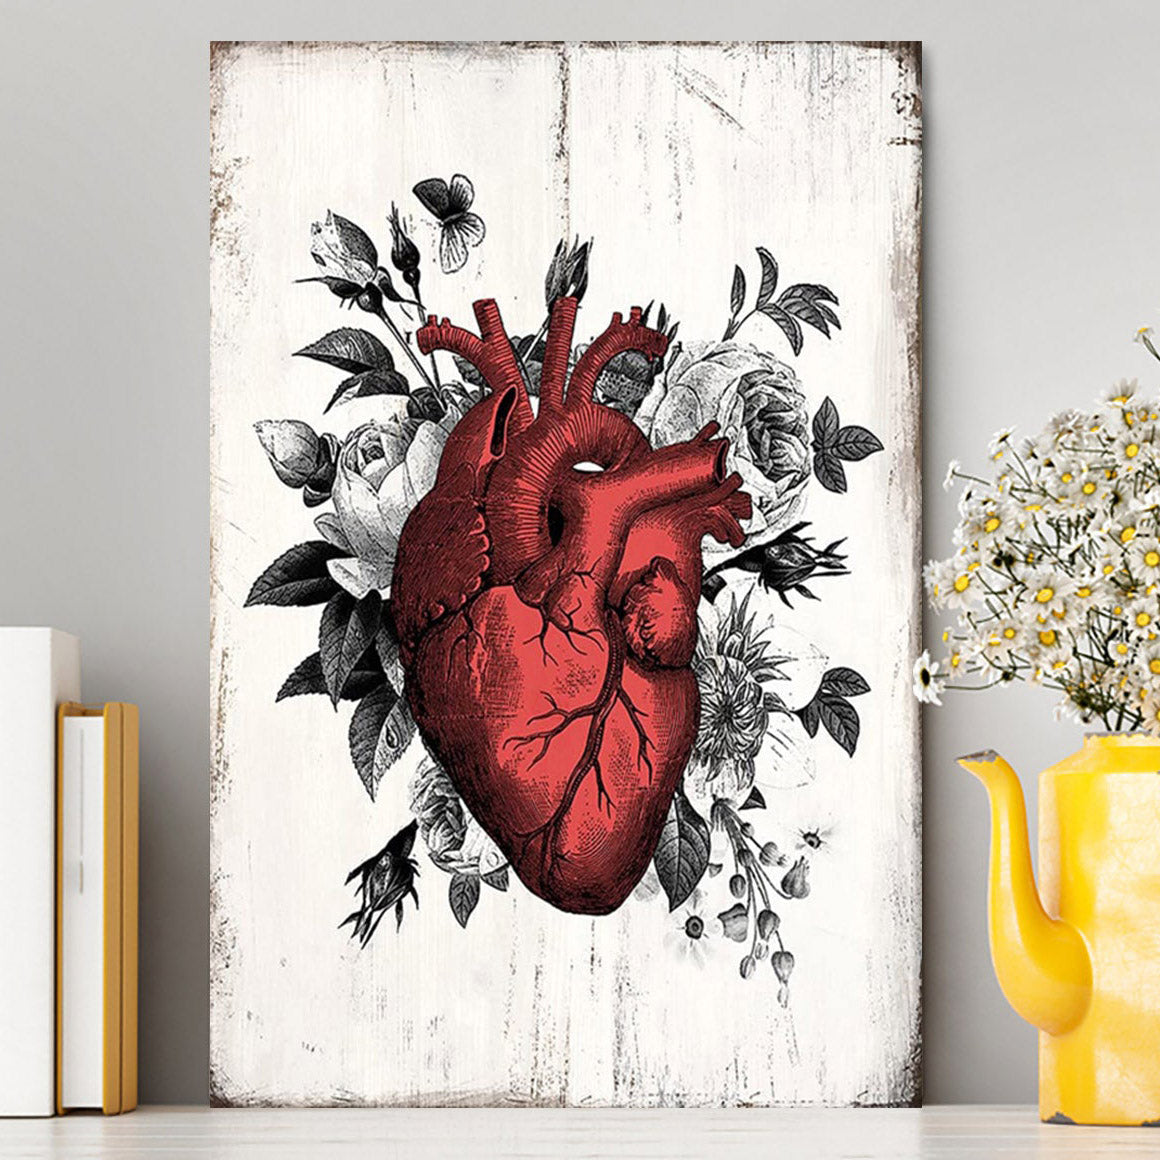 Rustic Floral Heart Wall Art - Decoration For Living Room, Bedroom, Medical Office - Gift For Nurse, Doctor, Rn, Physician Assistant, Women